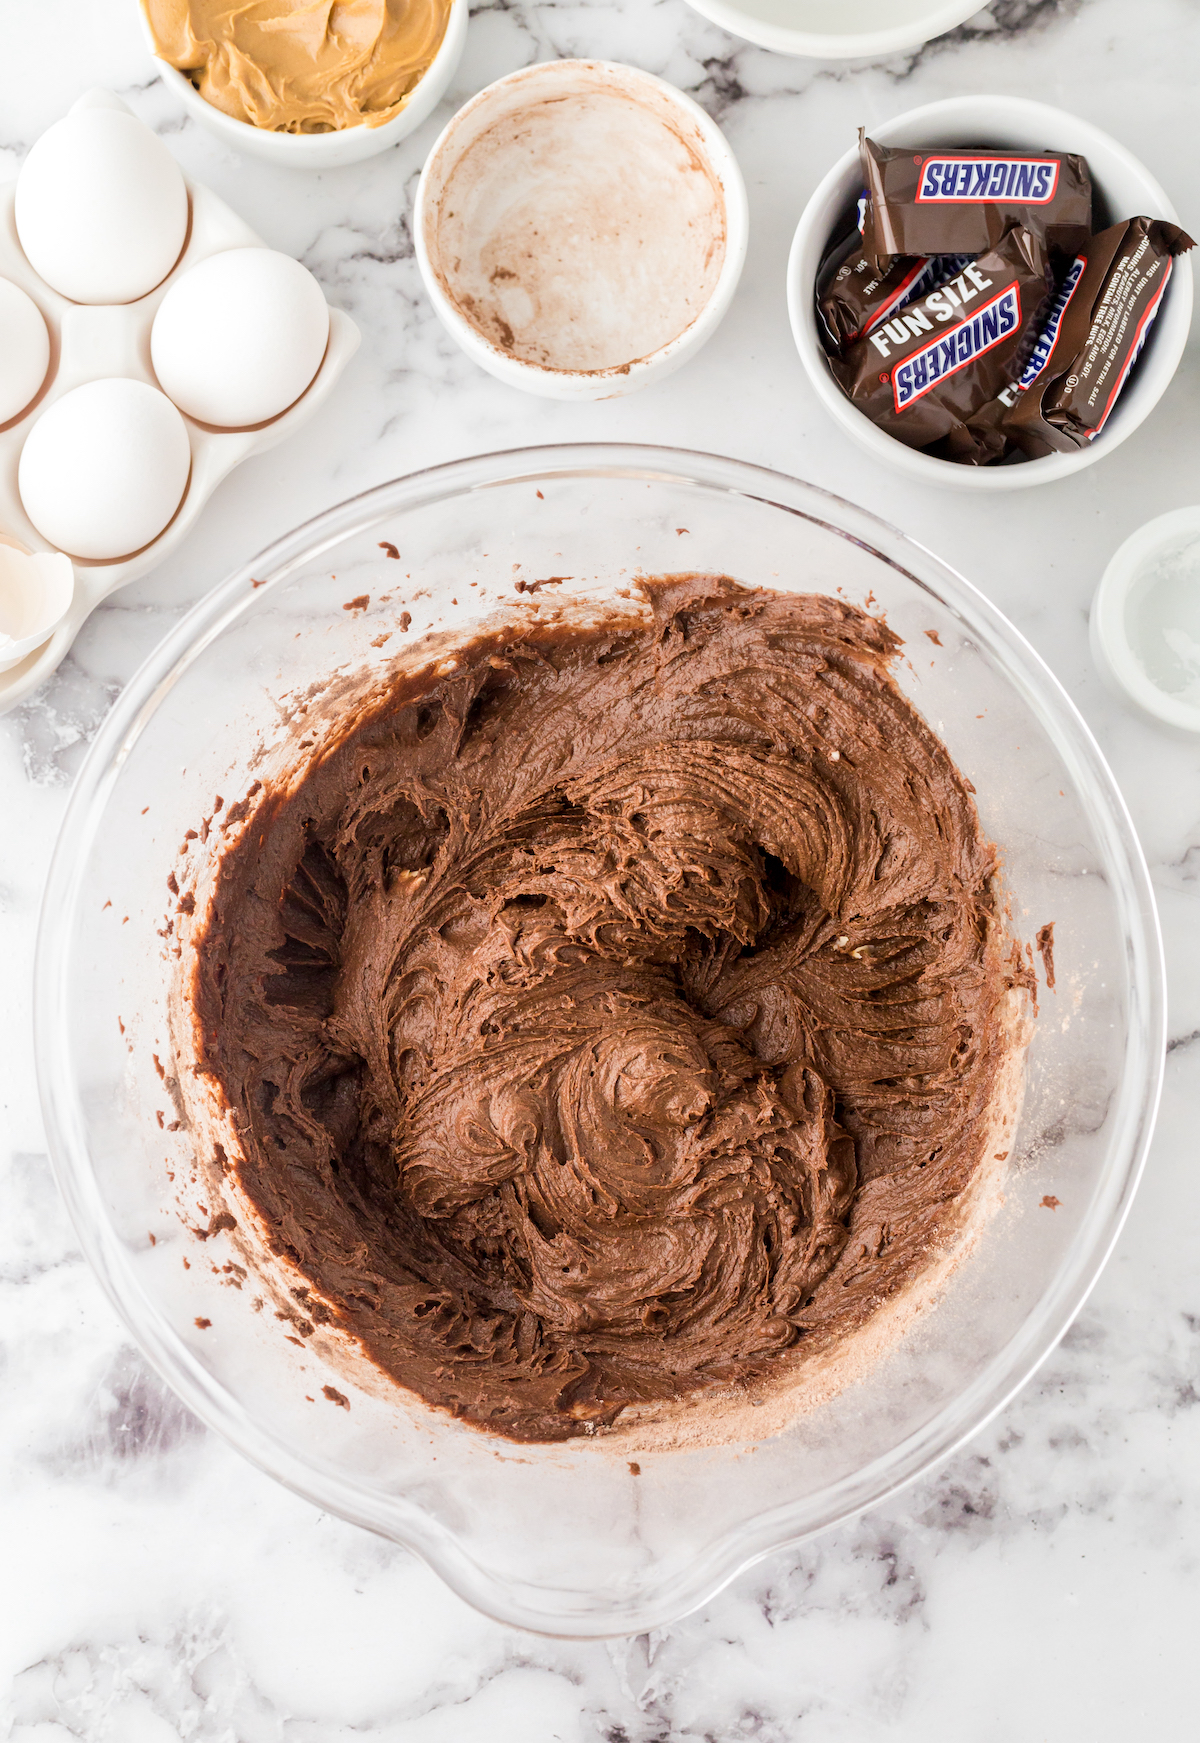 Snickers cupcake batter